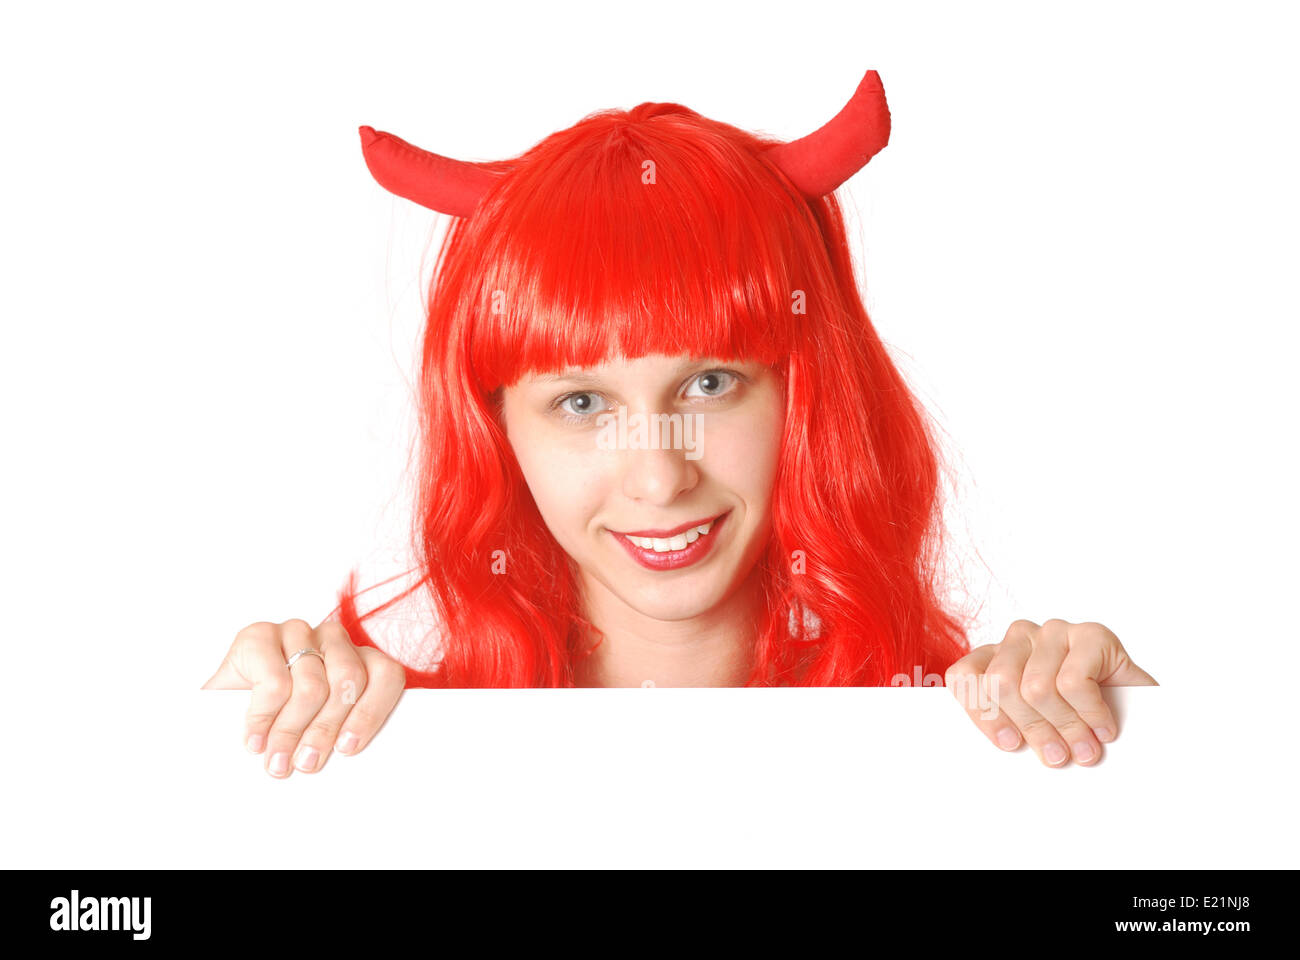 Devil girl Cut Out Stock Images & Pictures - Alamy